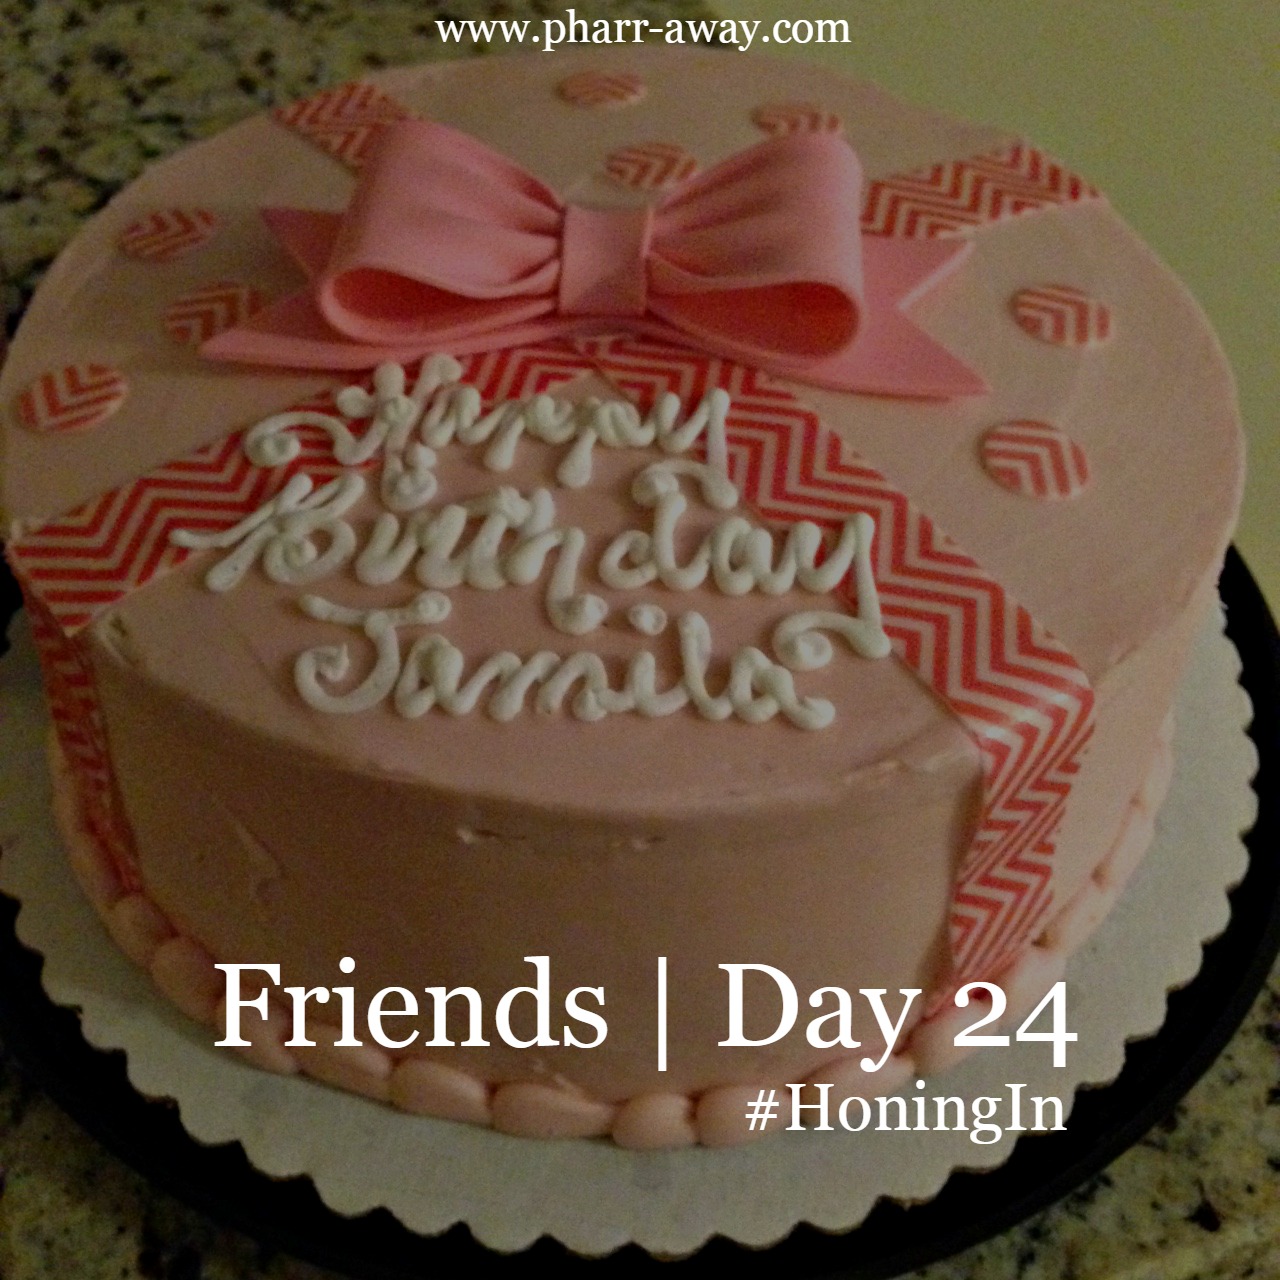 Friends | Day 24